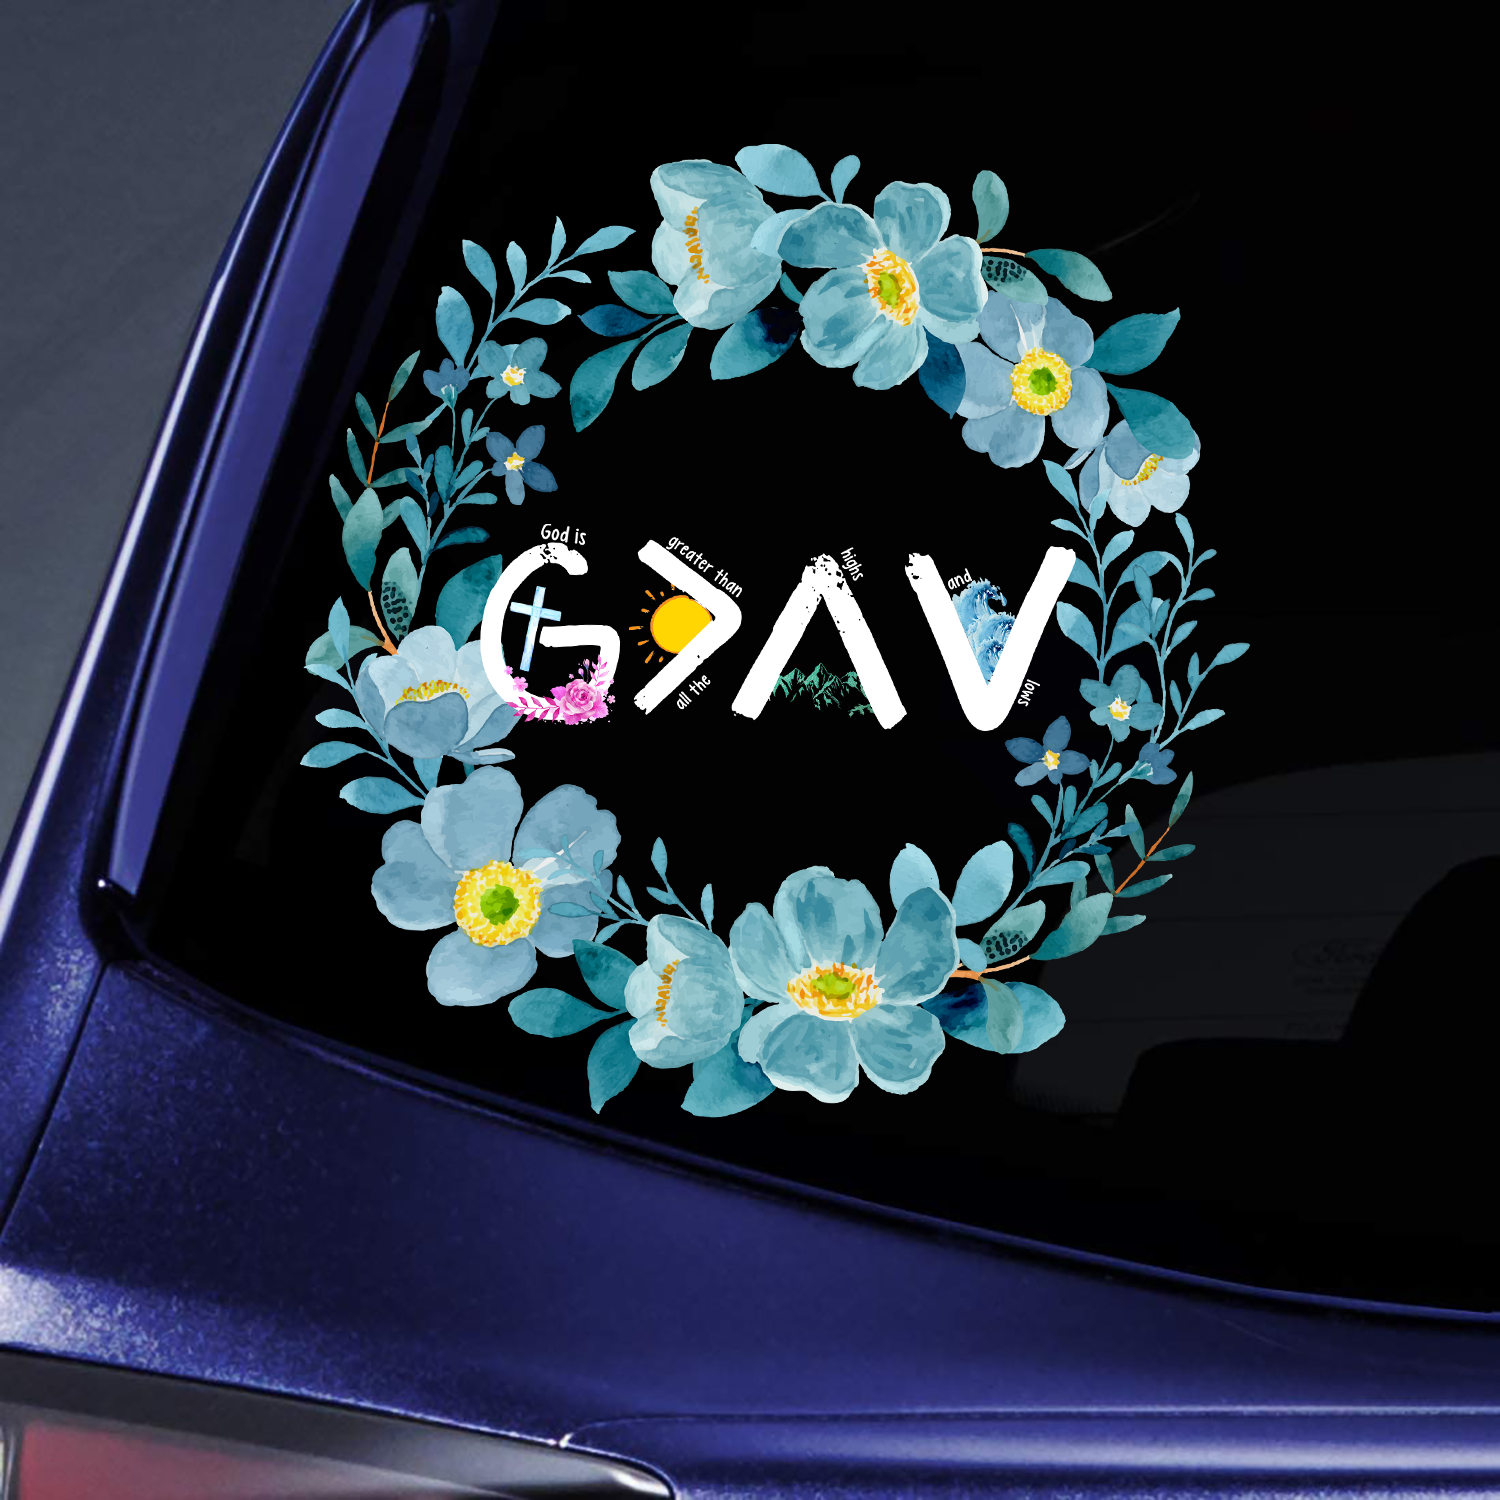 God is Greater than the Highs and Lows Sticker Decal